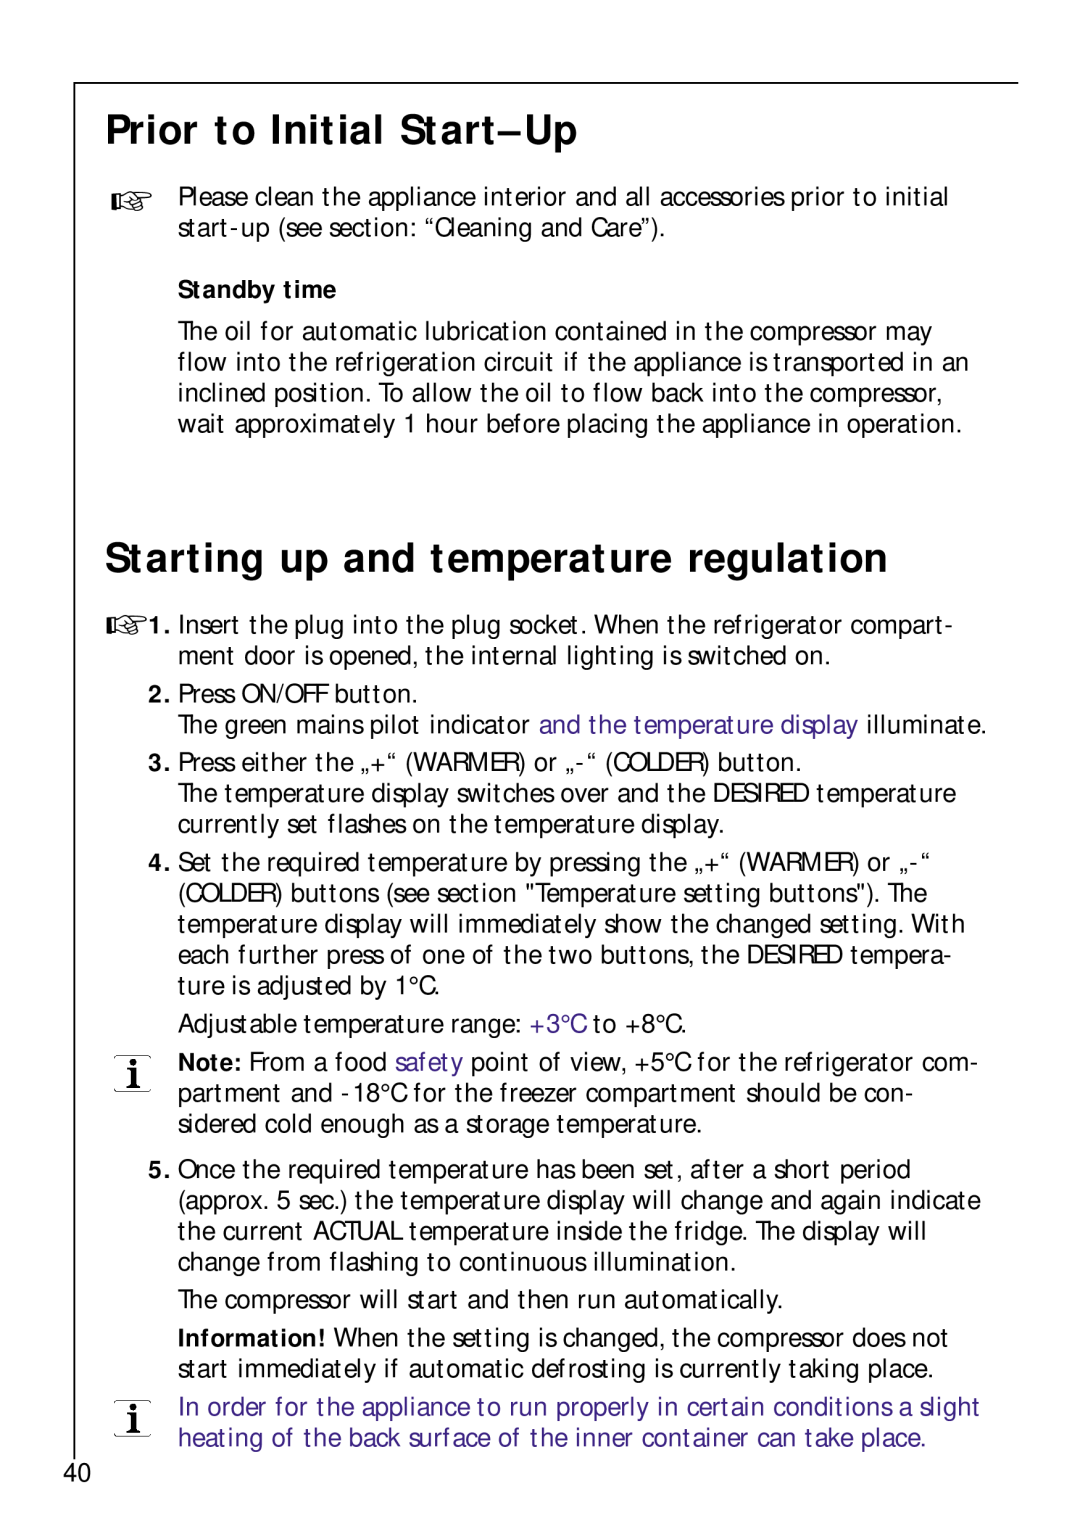 Electrolux Z 9 18 42-4 I user manual Prior to Initial Start-Up, Starting up and temperature regulation, Standby time 